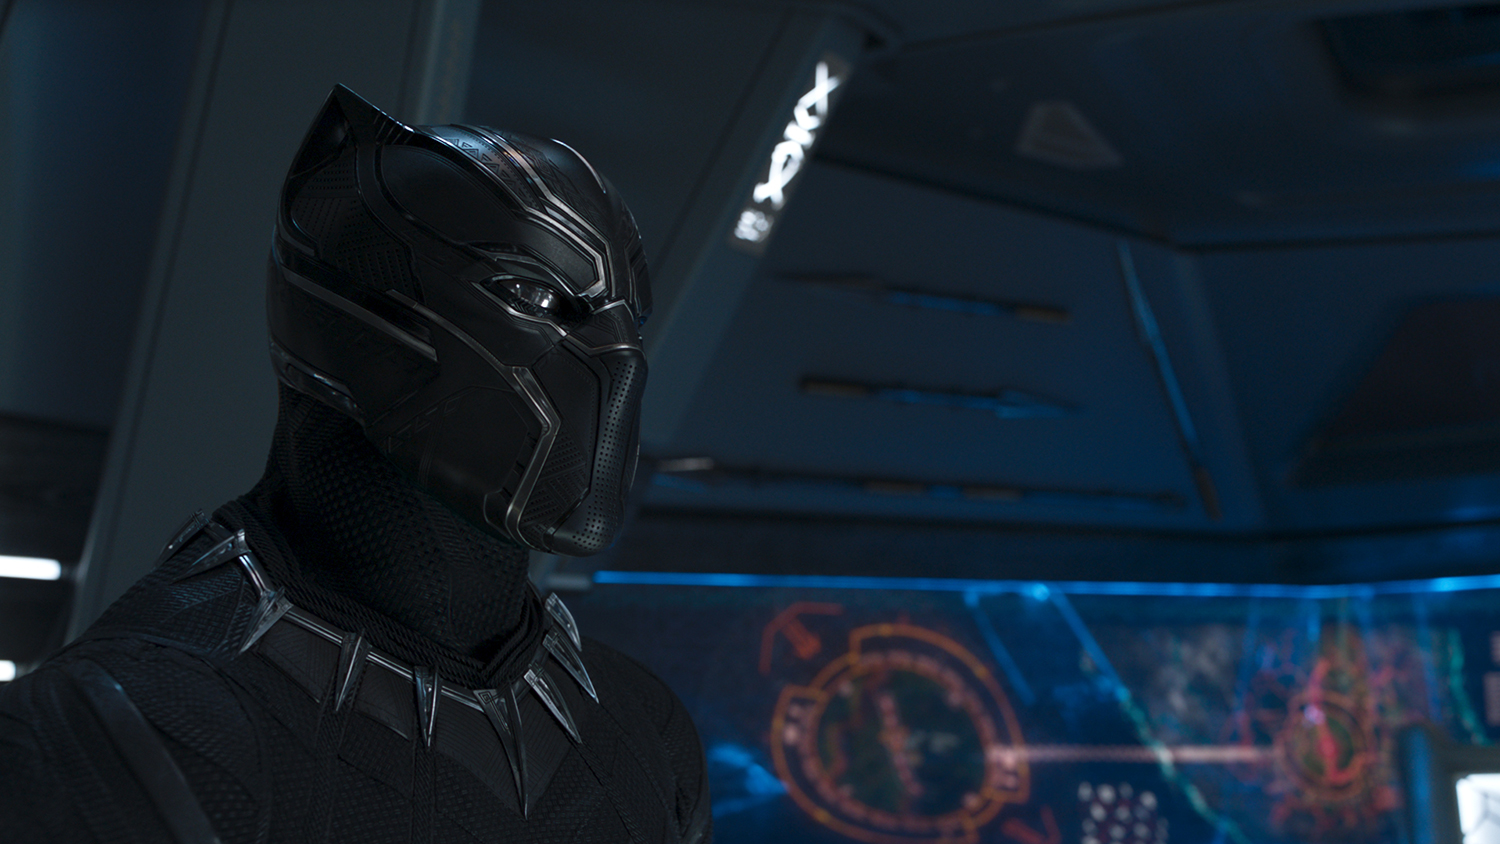 black panther review blackpanther5a0609aae41c4